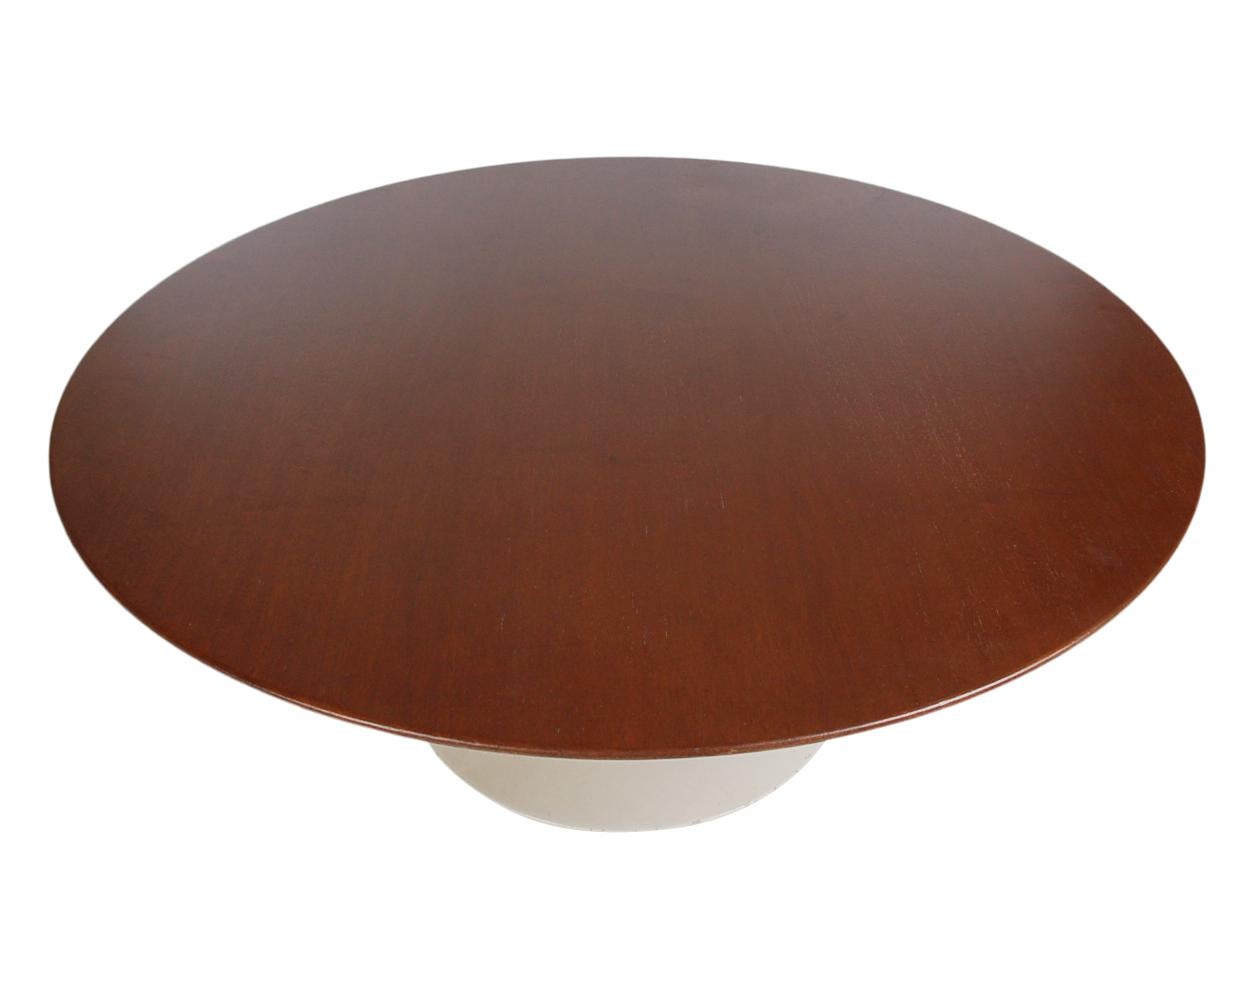 Mid-Century Modern Eero Saarinen for Knoll Tulip Coffee Table with Walnut Top In Good Condition For Sale In Philadelphia, PA